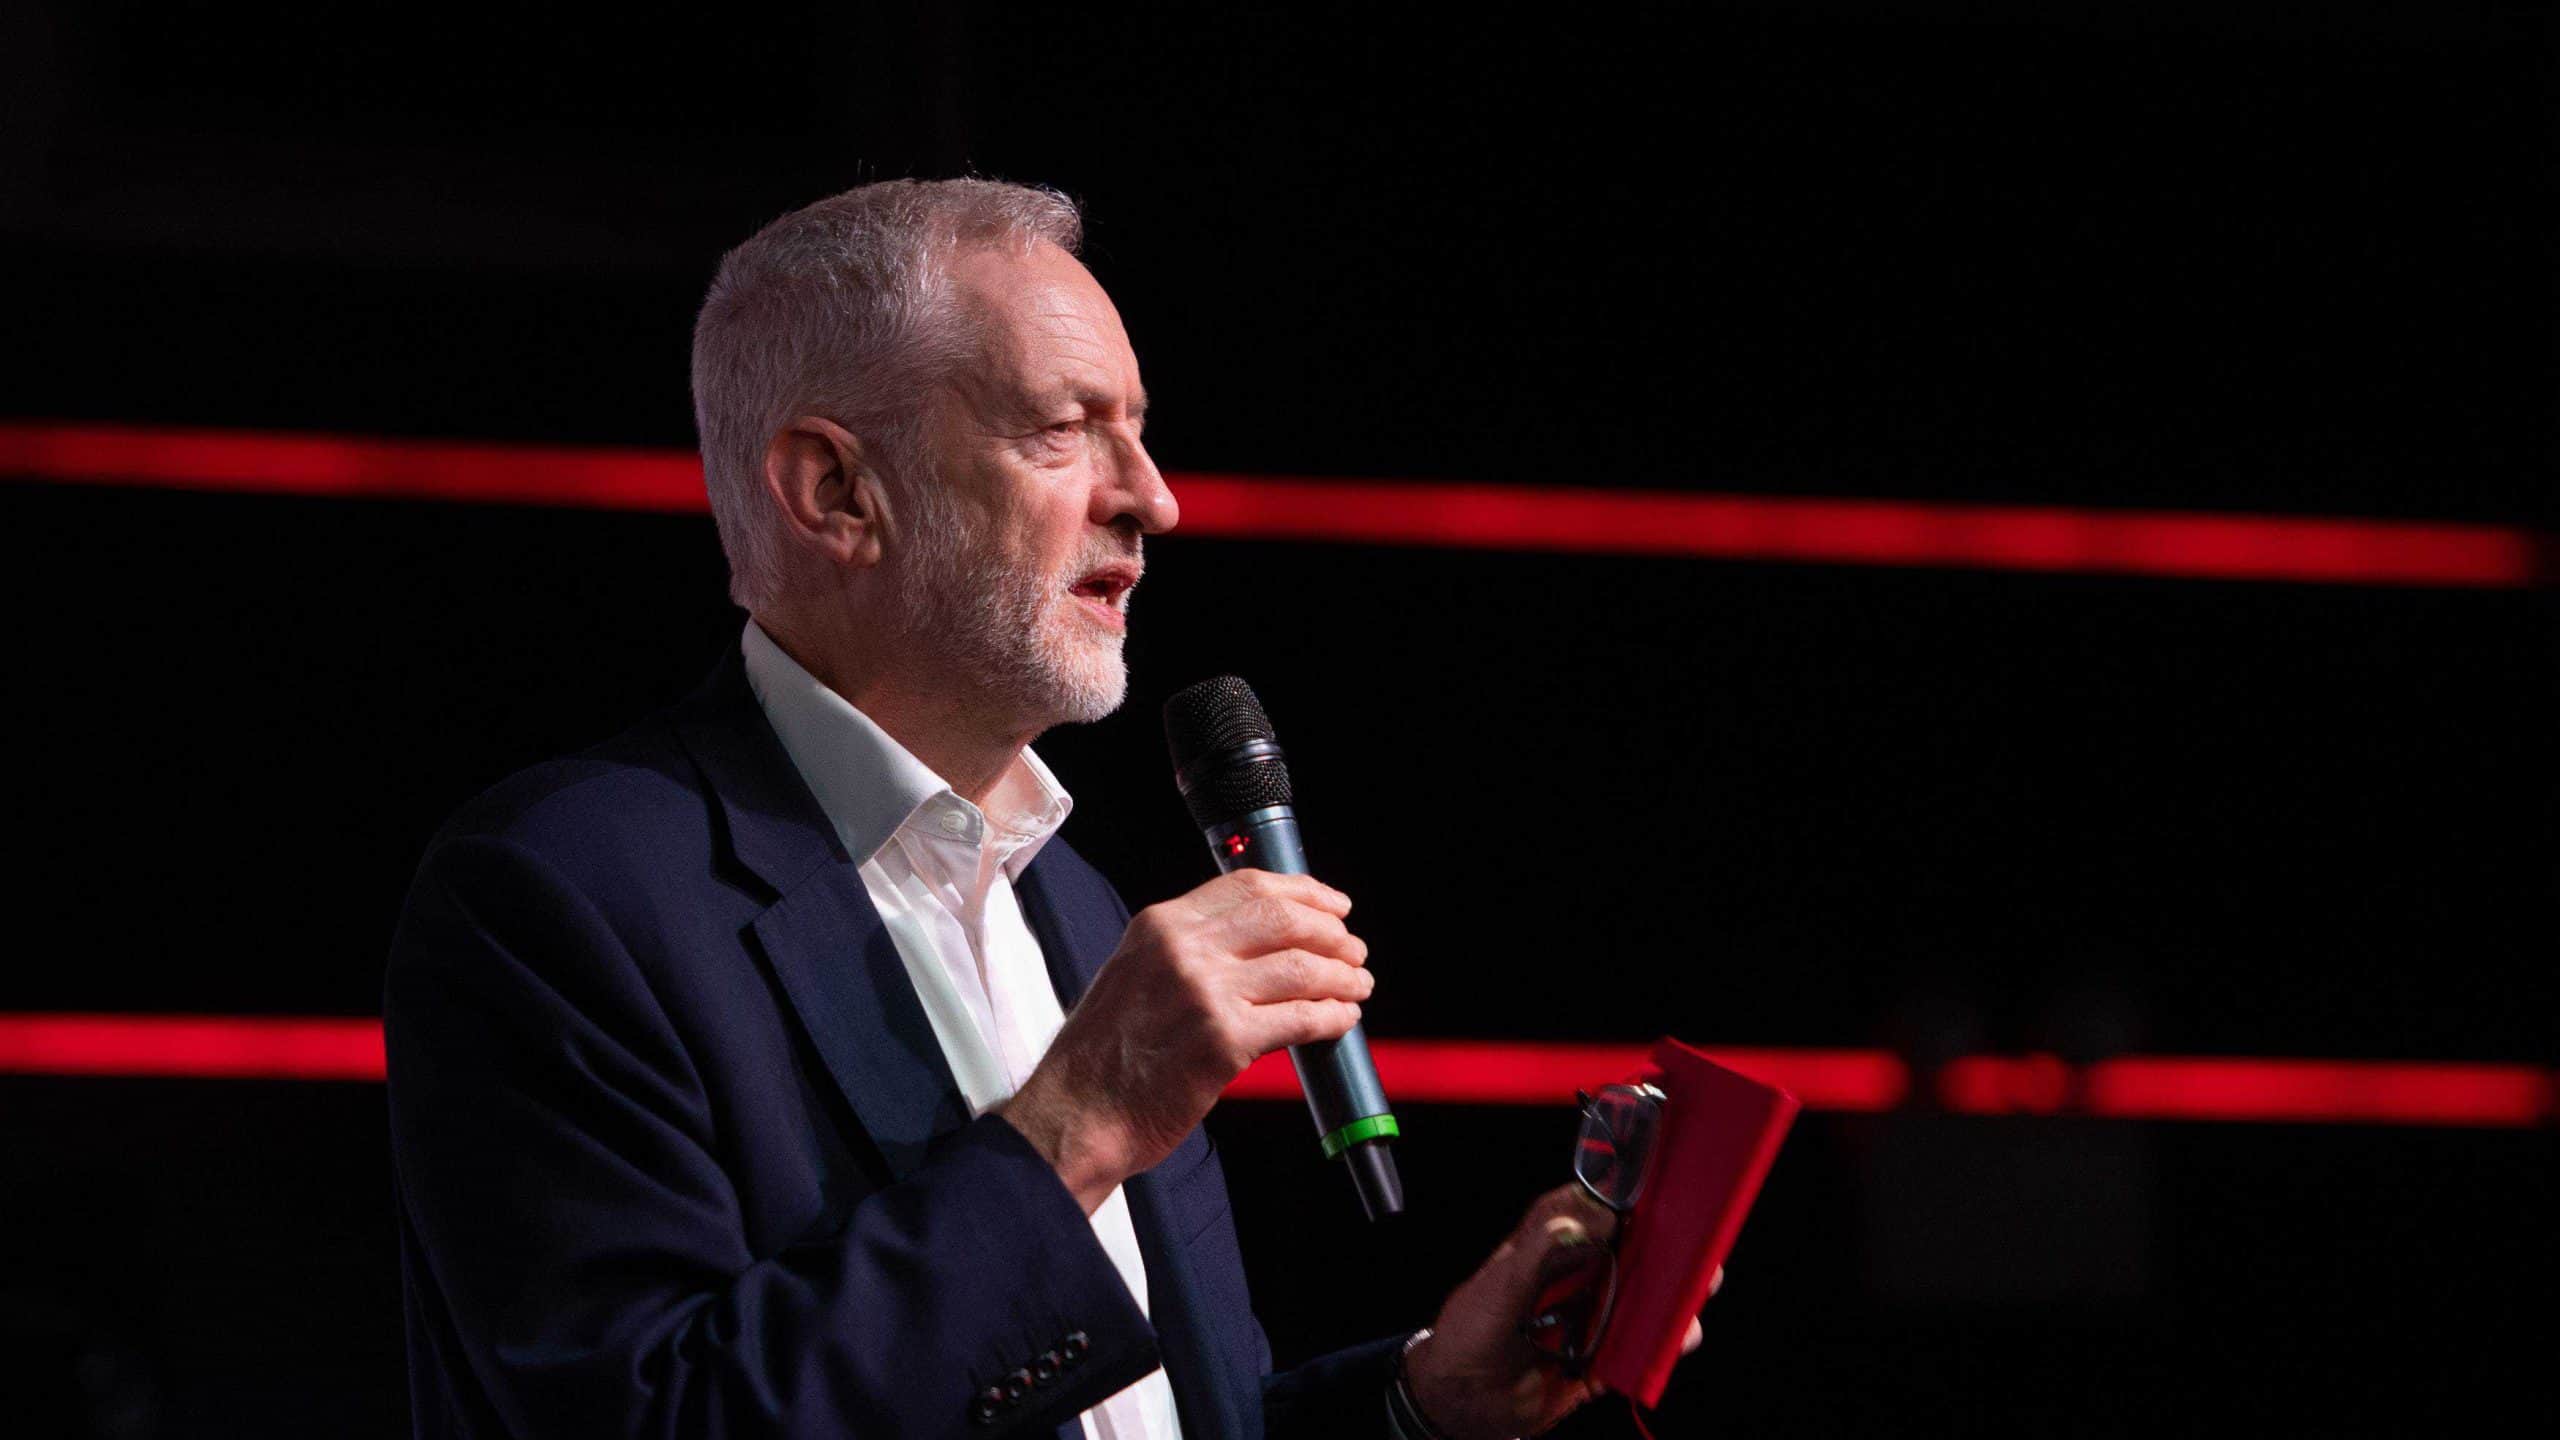 Corbyn says anti-Semitism is ‘vile and wrong’ after Chief Rabbi warning